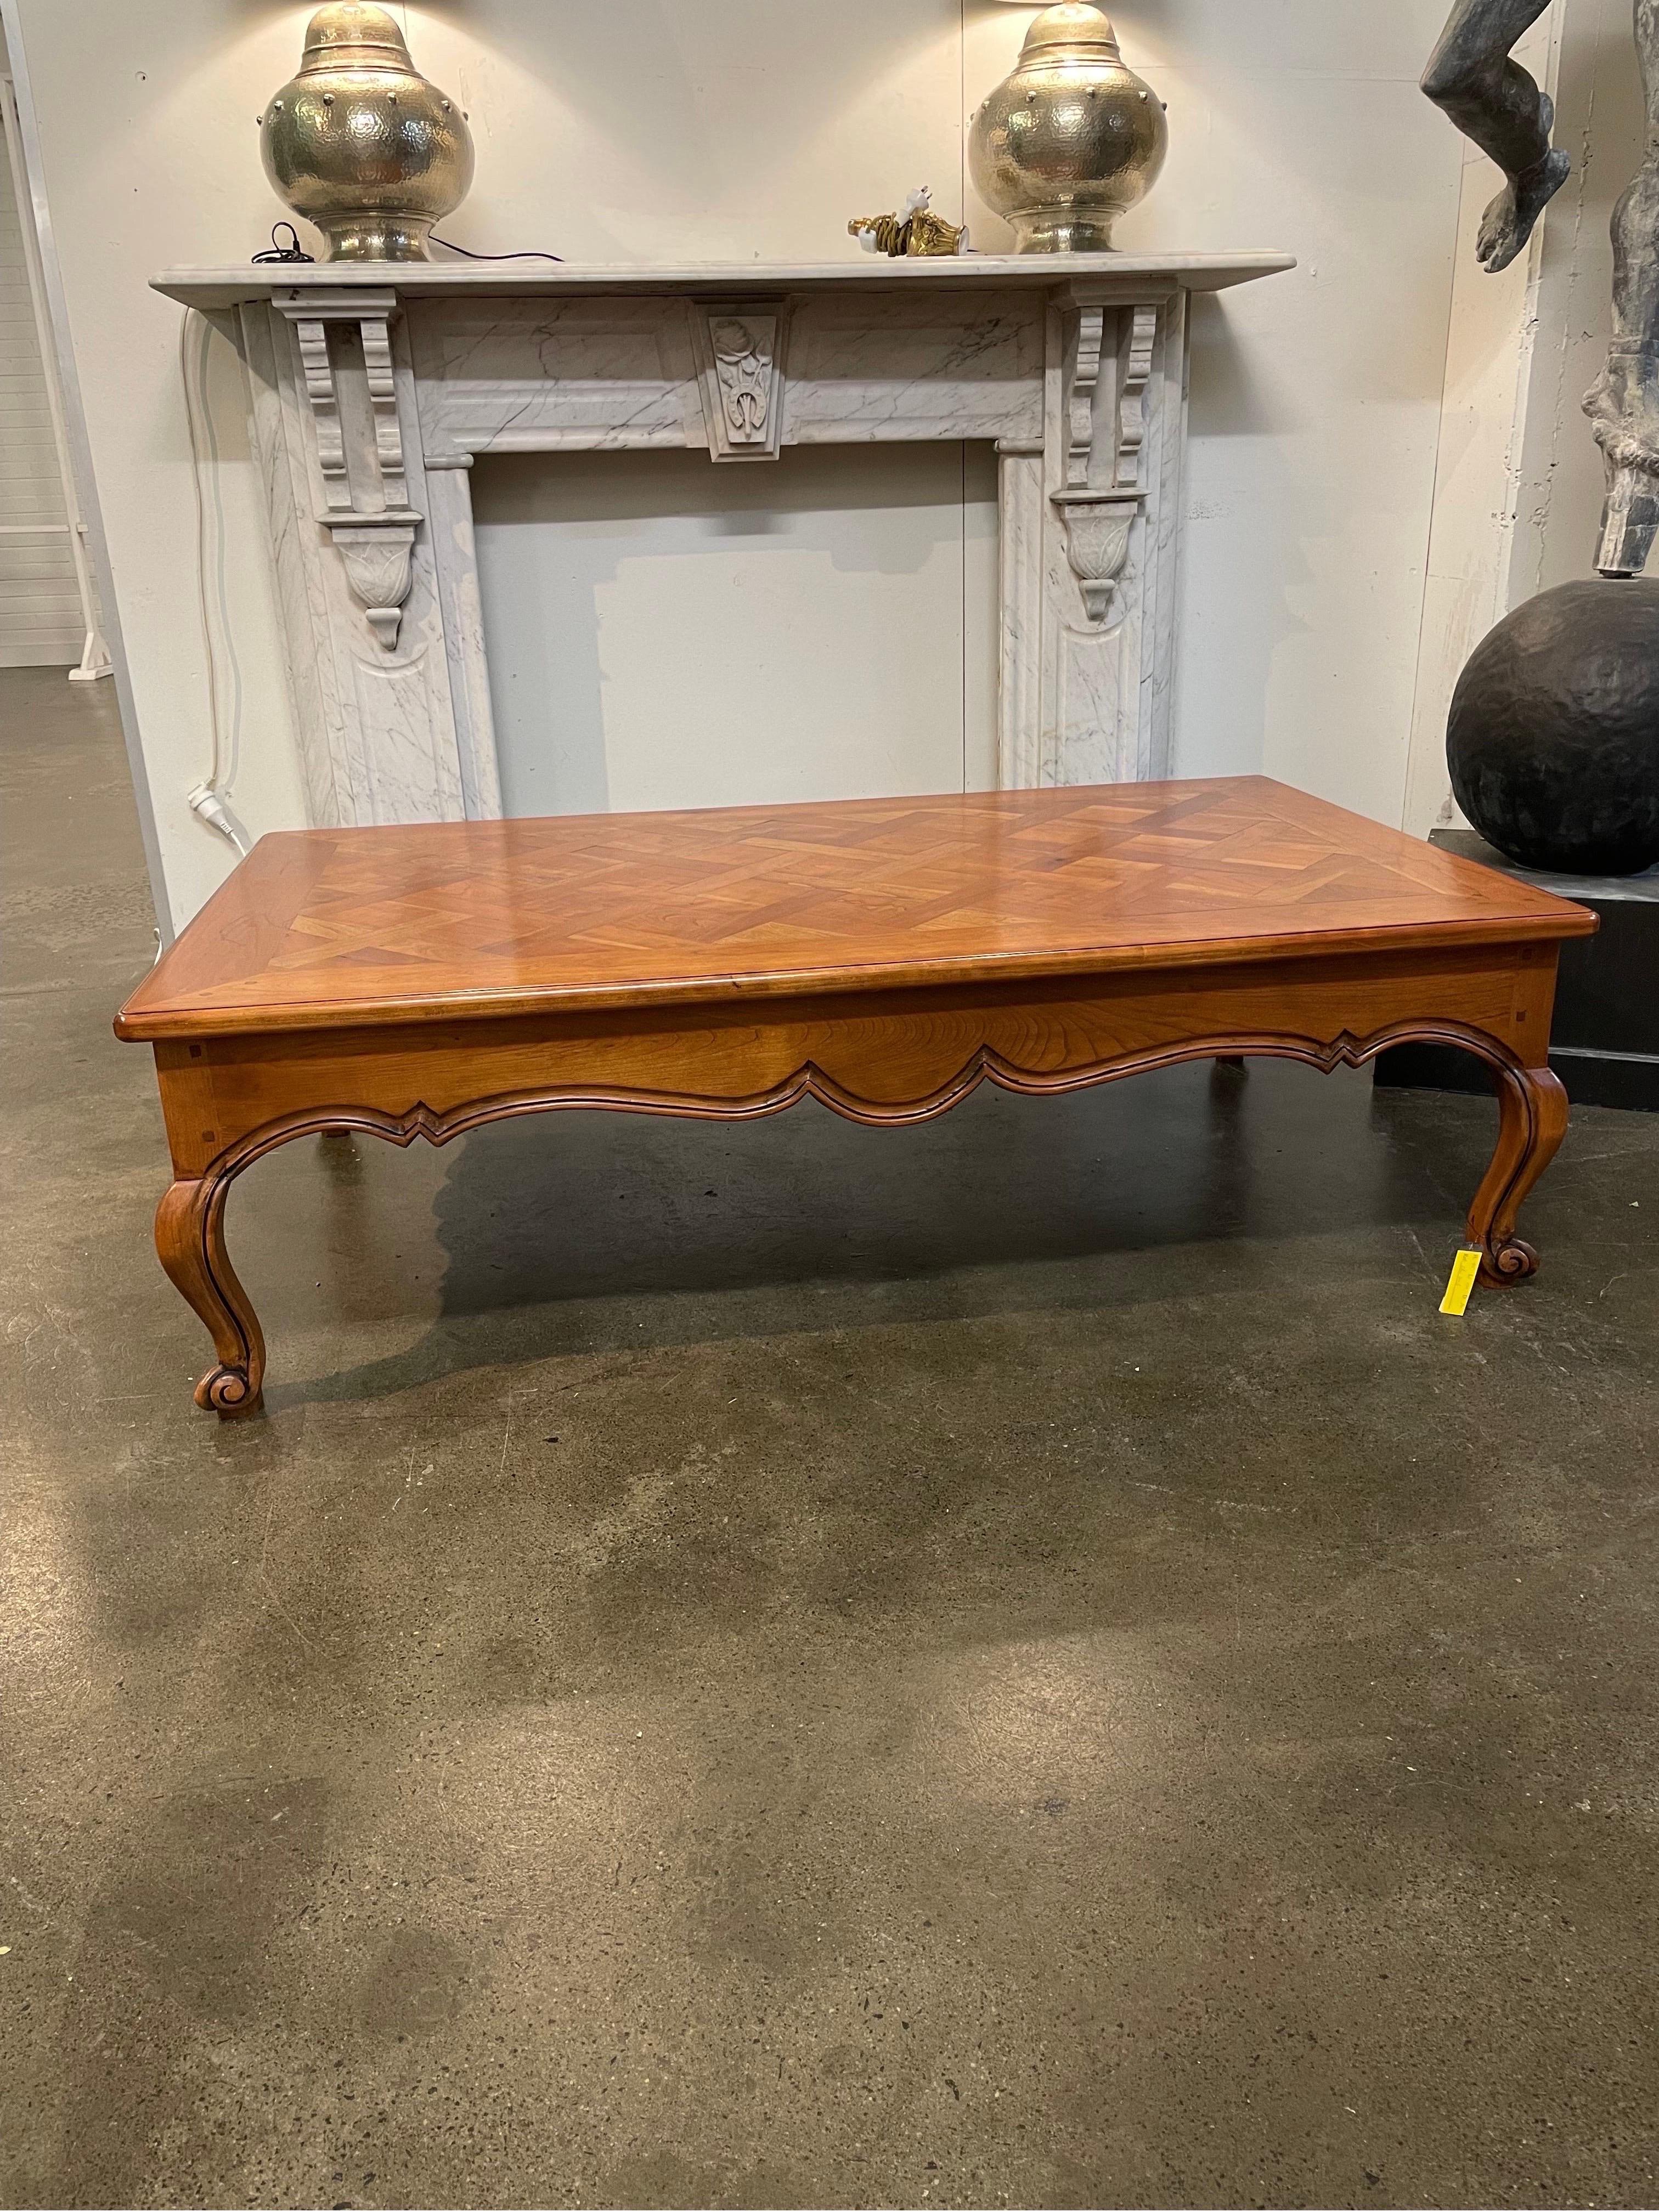 A Rectangular French Provincial Style Parquetry Coffee Table

Provenance: Private Melbourne Collection.

Dimension: Width: 150 cm Height: 45cm Depth: 90 cm.